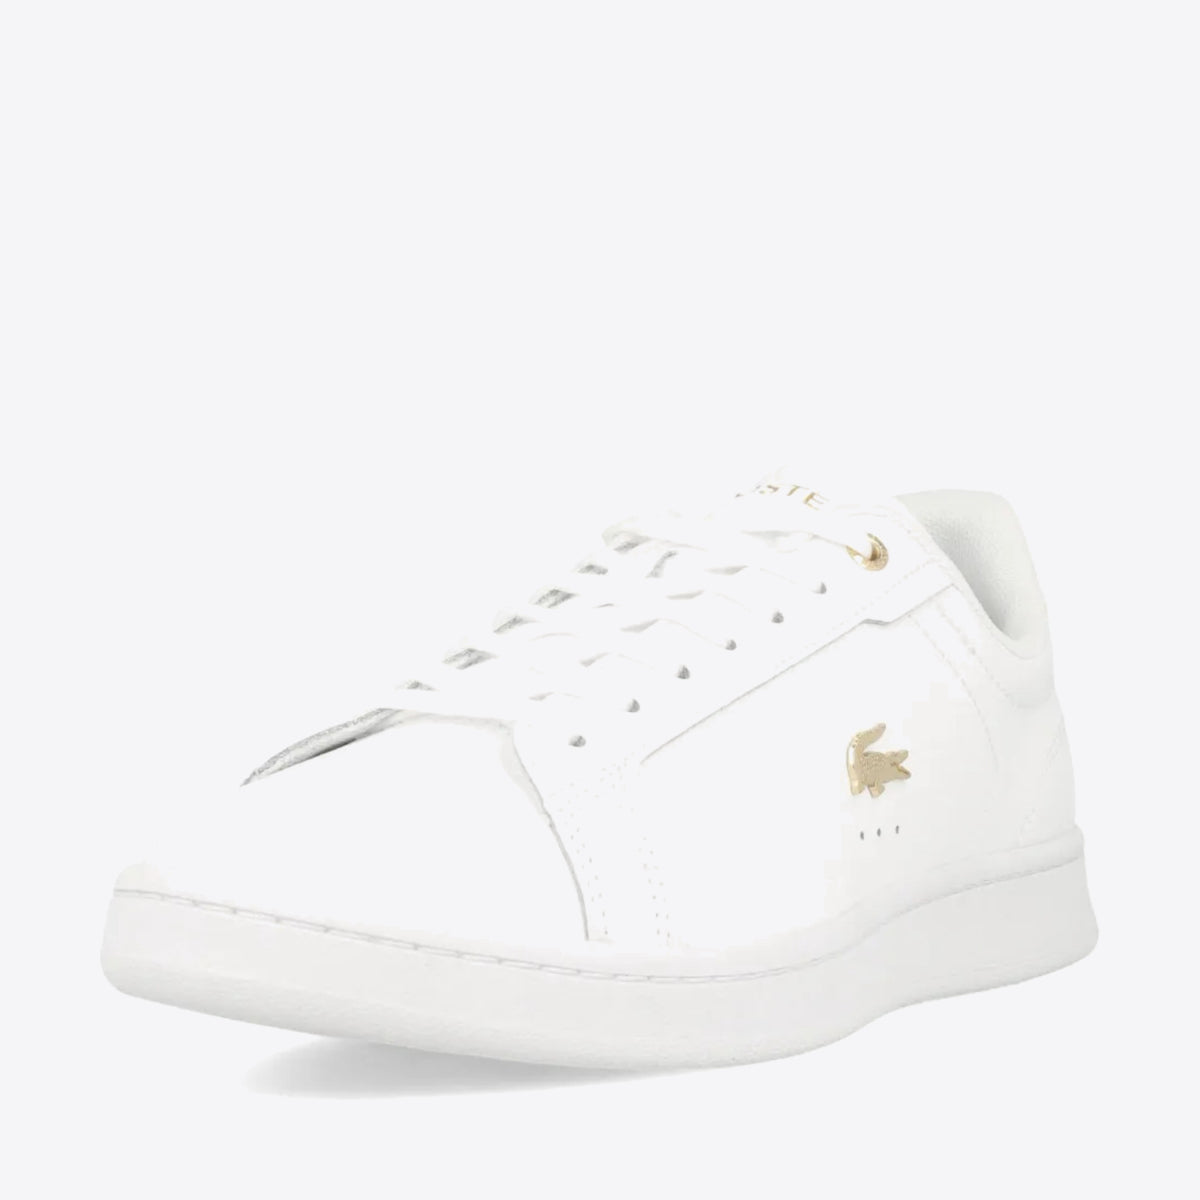 LACOSTE Carnaby Pro White - Image 6